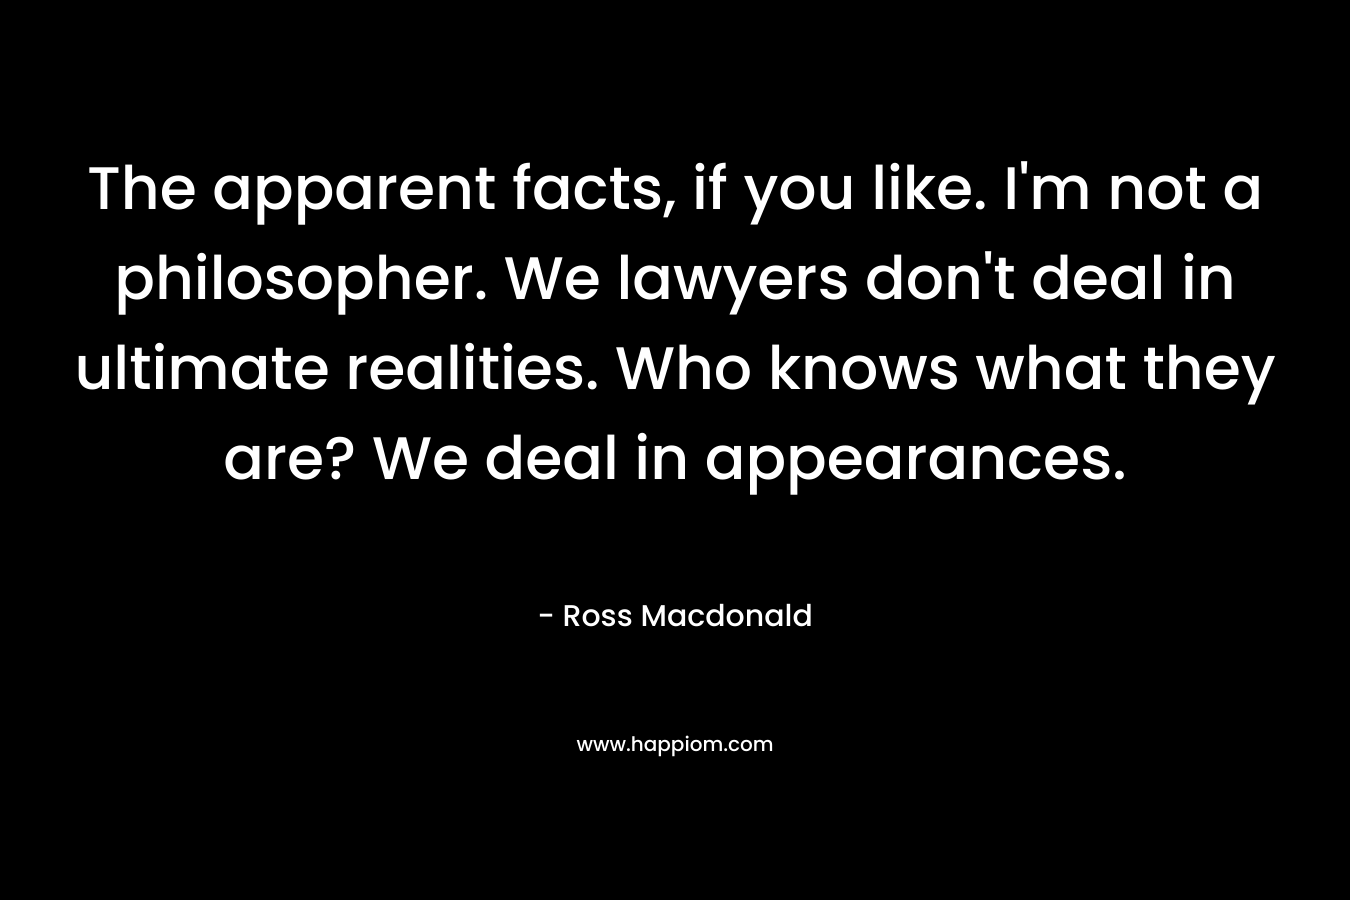 The apparent facts, if you like. I’m not a philosopher. We lawyers don’t deal in ultimate realities. Who knows what they are? We deal in appearances. – Ross Macdonald